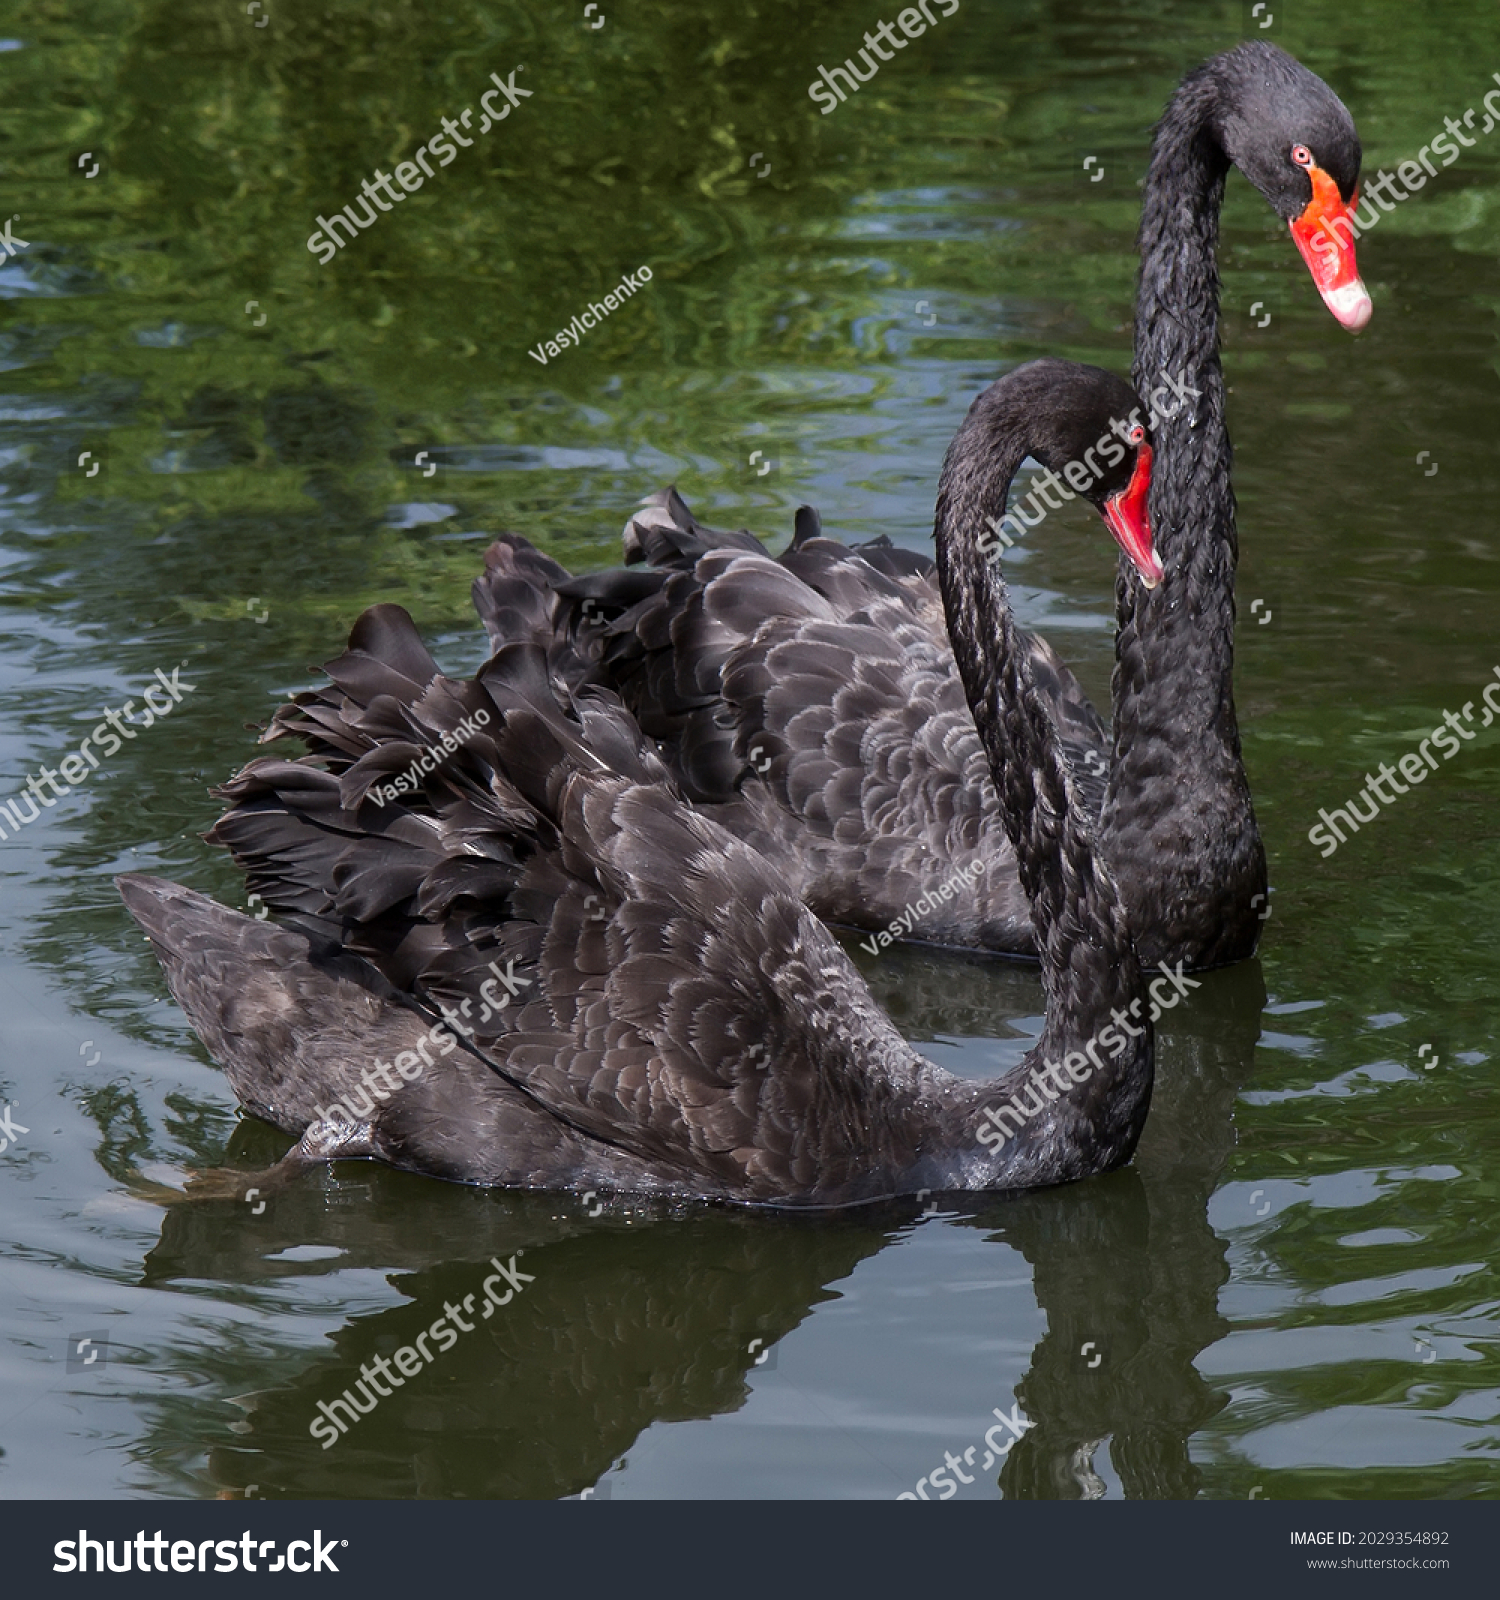 Two black swans on the surface of the lake close-up. Swans swim in greenish water. #2029354892